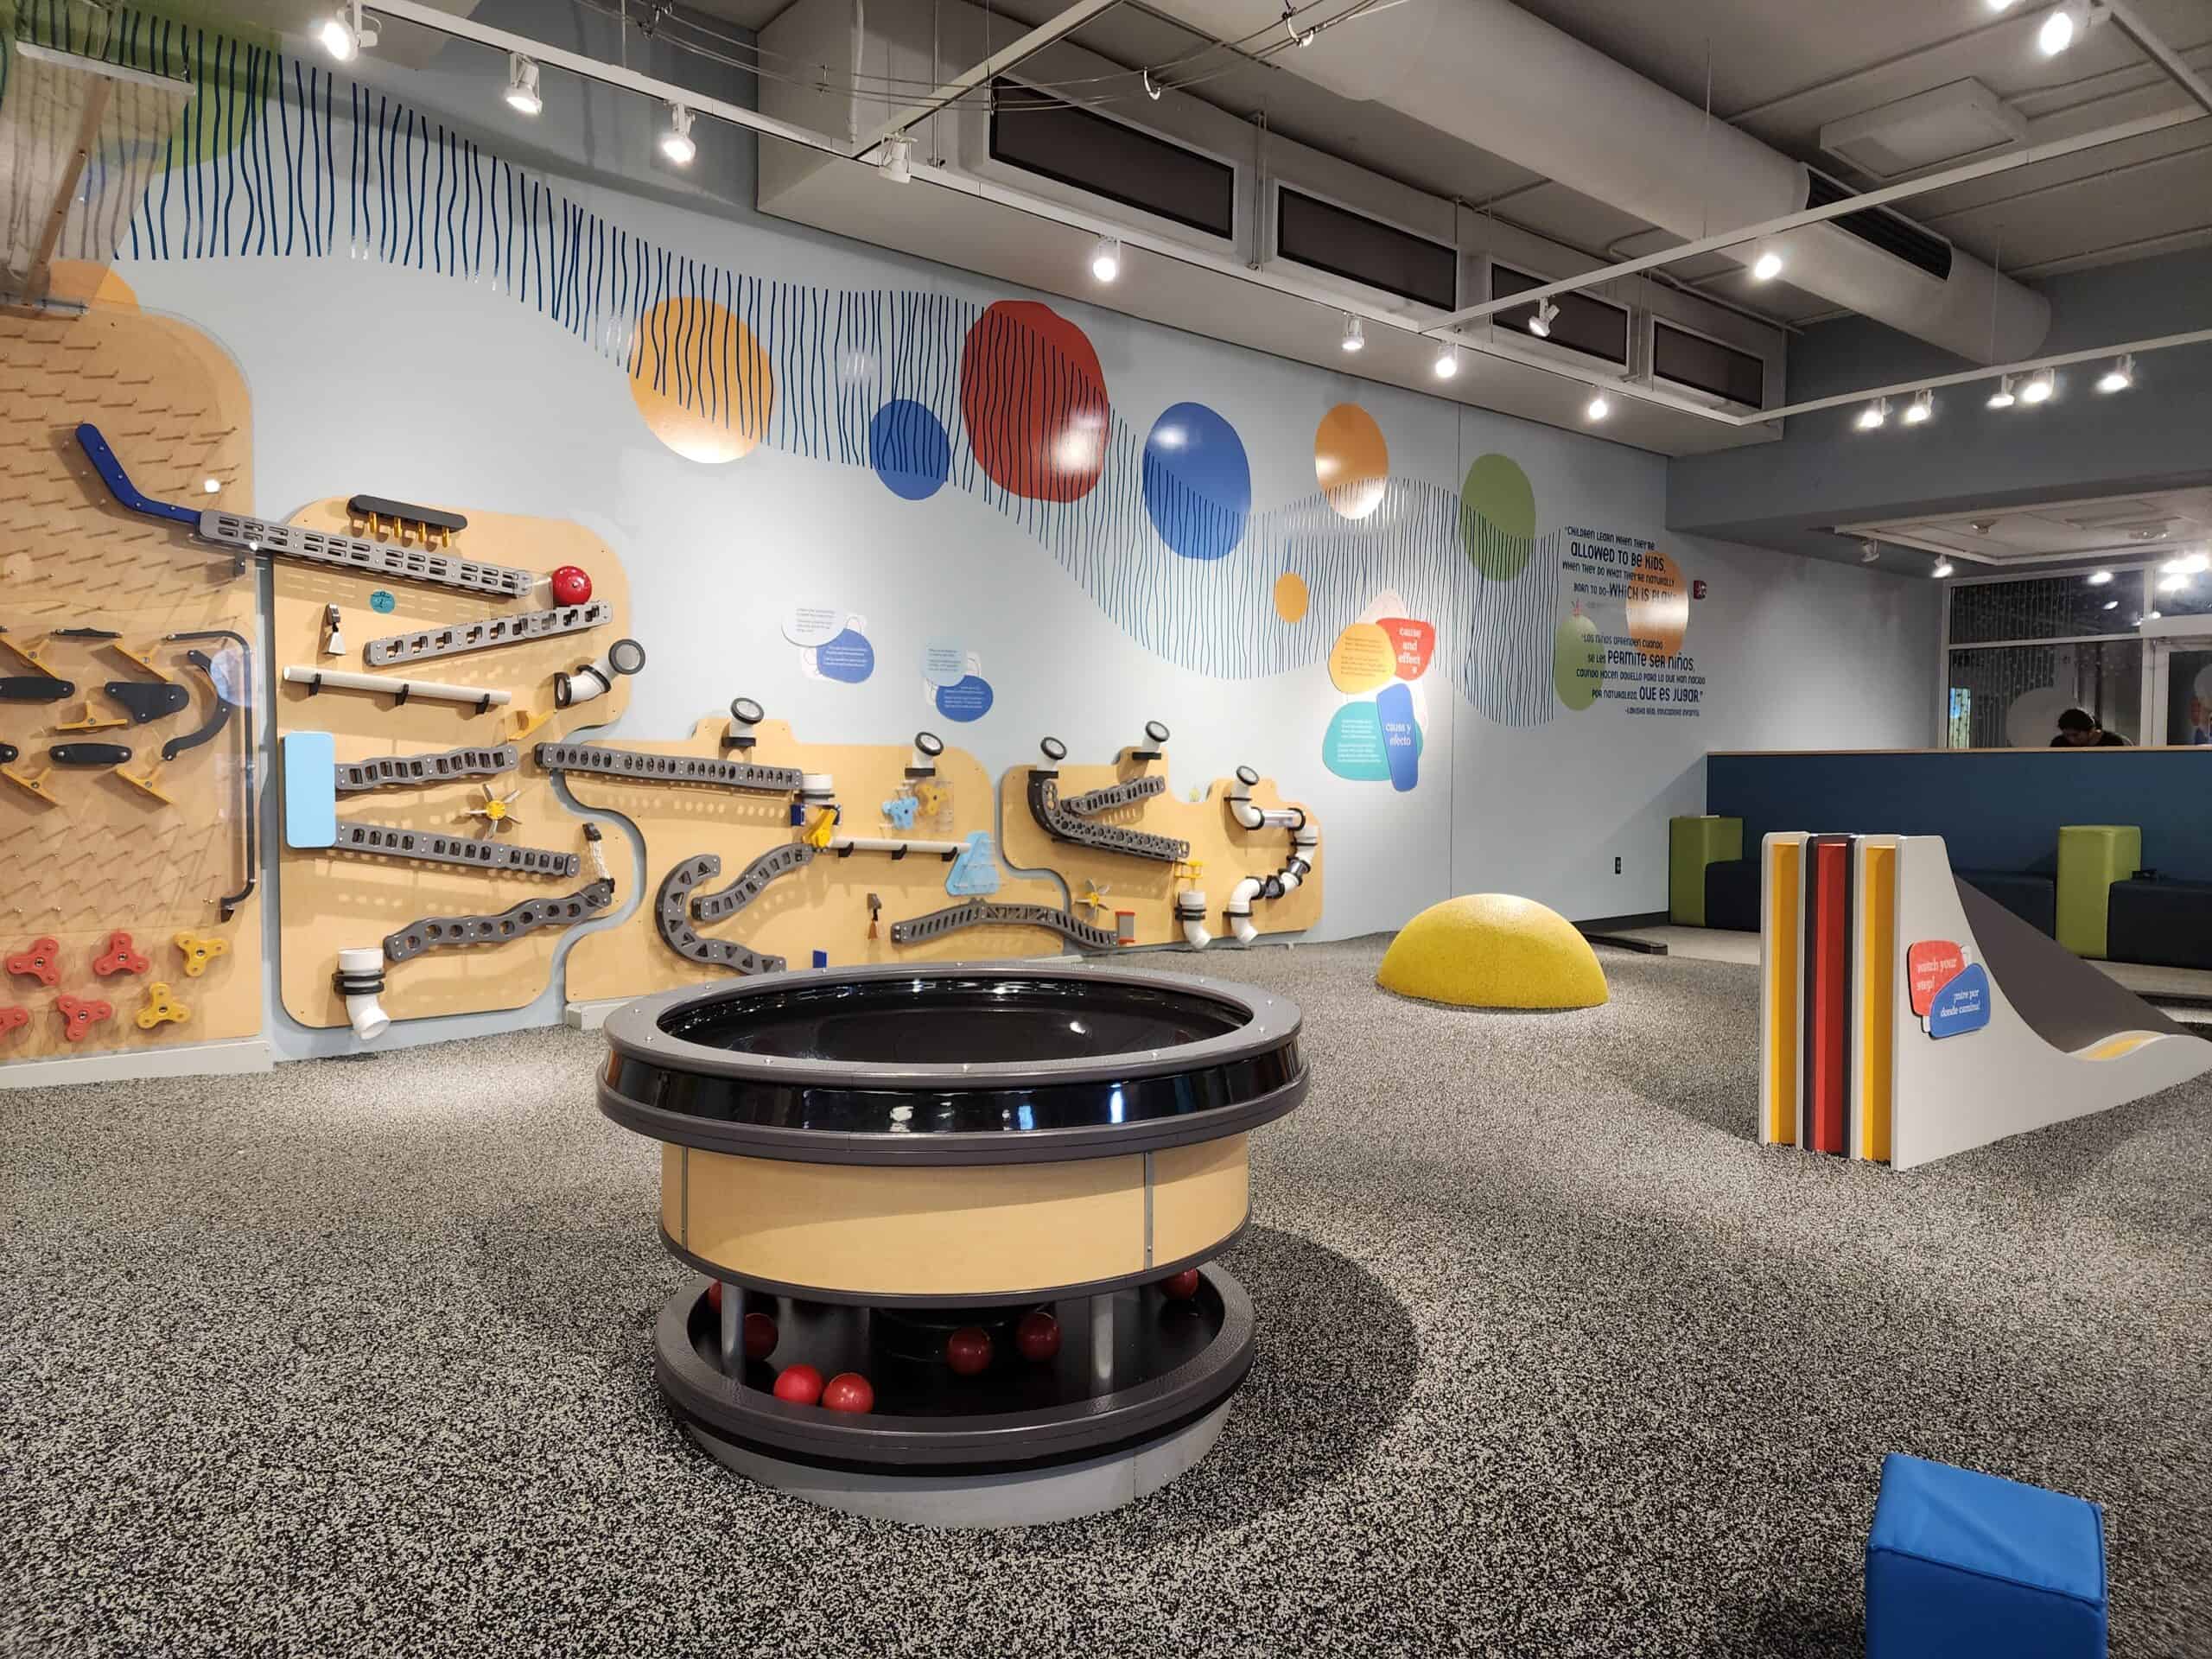 Colorful indoor playground at a facility in Durham, NC, featuring a wall-mounted ball track and interactive play areas with educational elements designed for children's creative learning and play